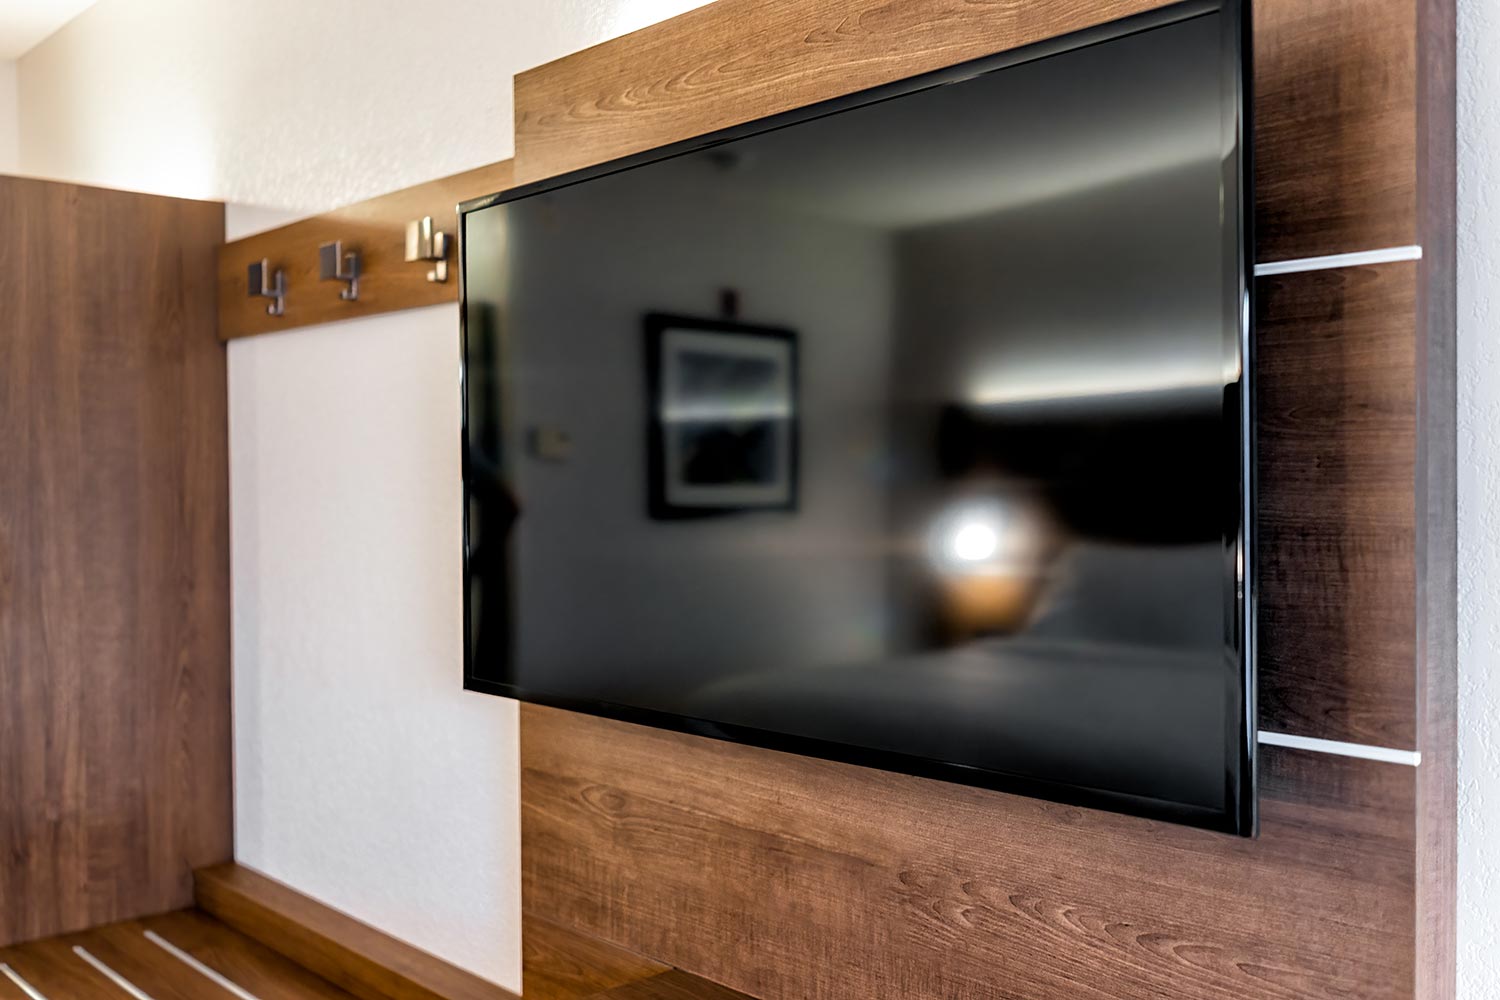 Wooden modern style hotel suite room with tv television mounted to wall